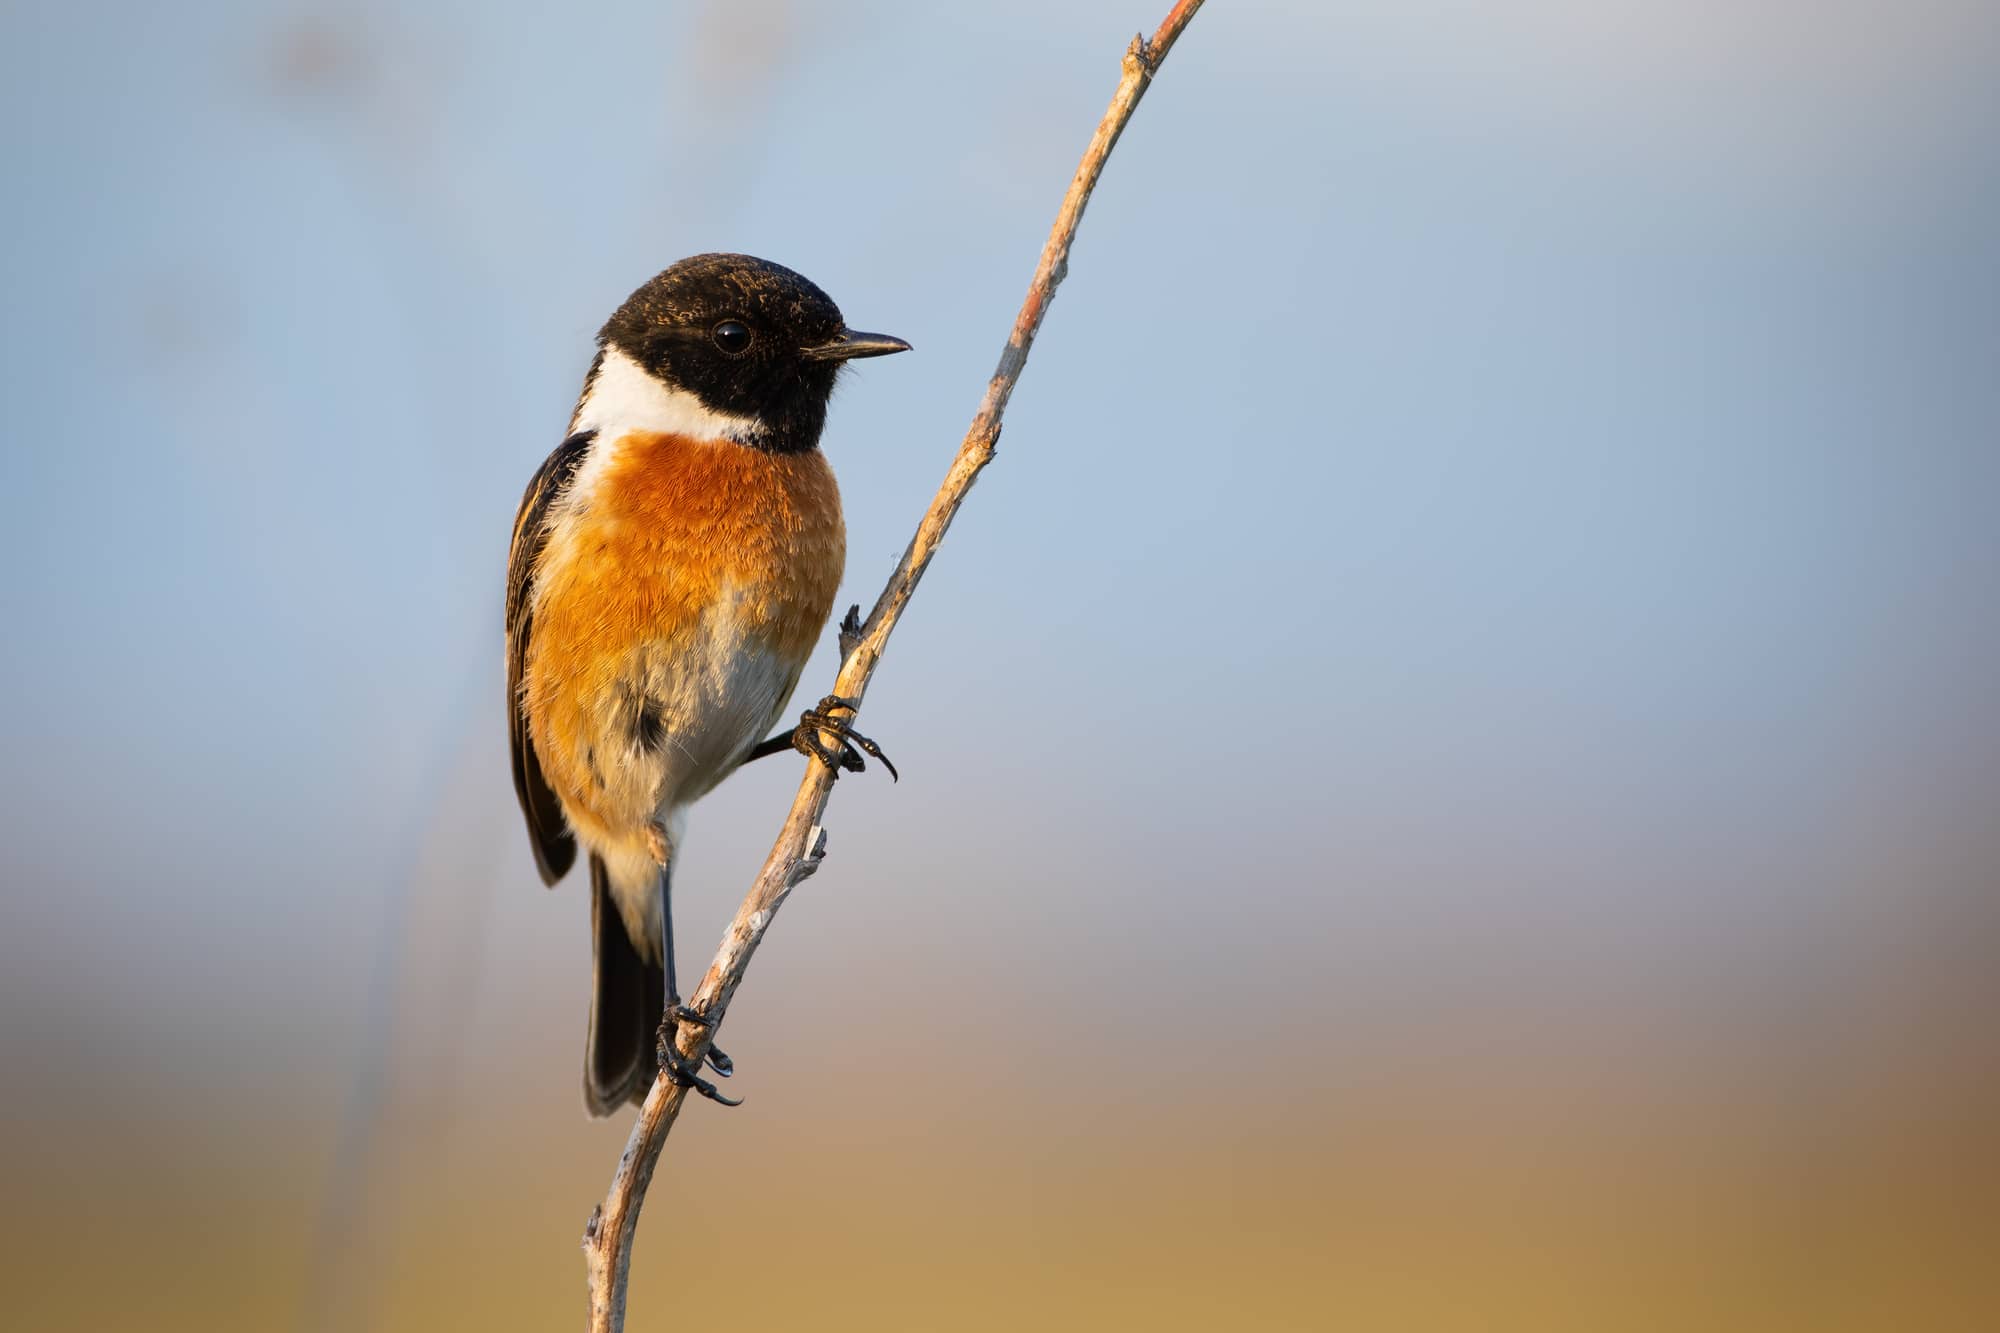 Male european stonechat, saxicola rubicola, sitting on diagonal plant stem with blue sky in background. Passerine bird still from front view with copy space.